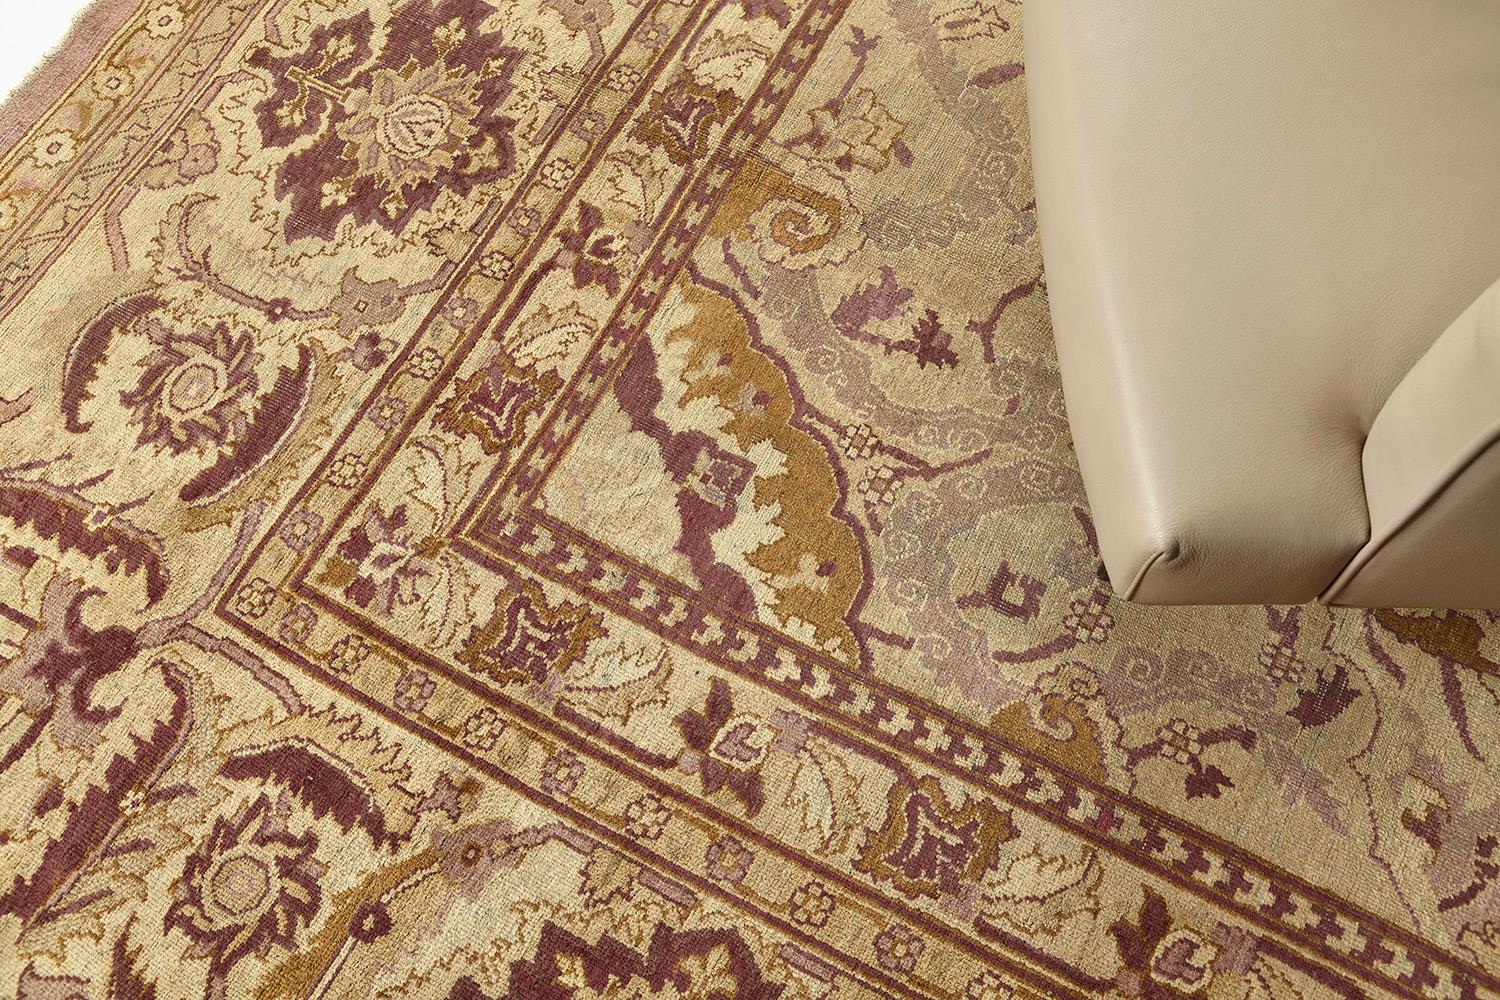 Get mesmerized by this Agra rug that features a transitional design that complements the motifs. Series of symmetrically golden leafy scrolls and tendrils, florets, and medallions are featured. Perfect for your traditional home interior that matches